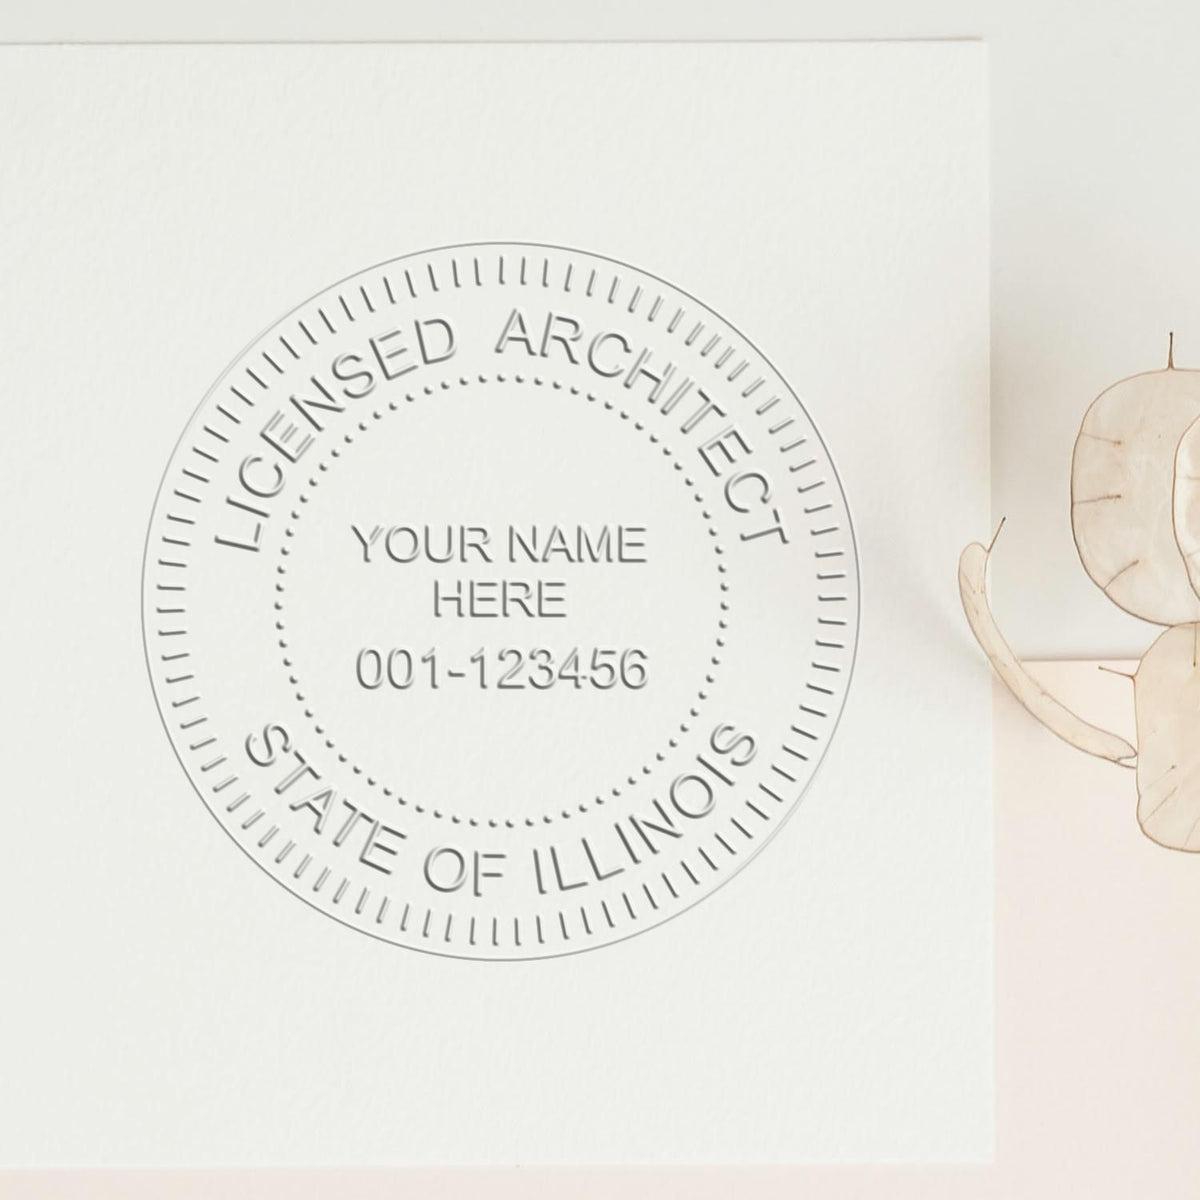 A lifestyle photo showing a stamped image of the Illinois Desk Architect Embossing Seal on a piece of paper